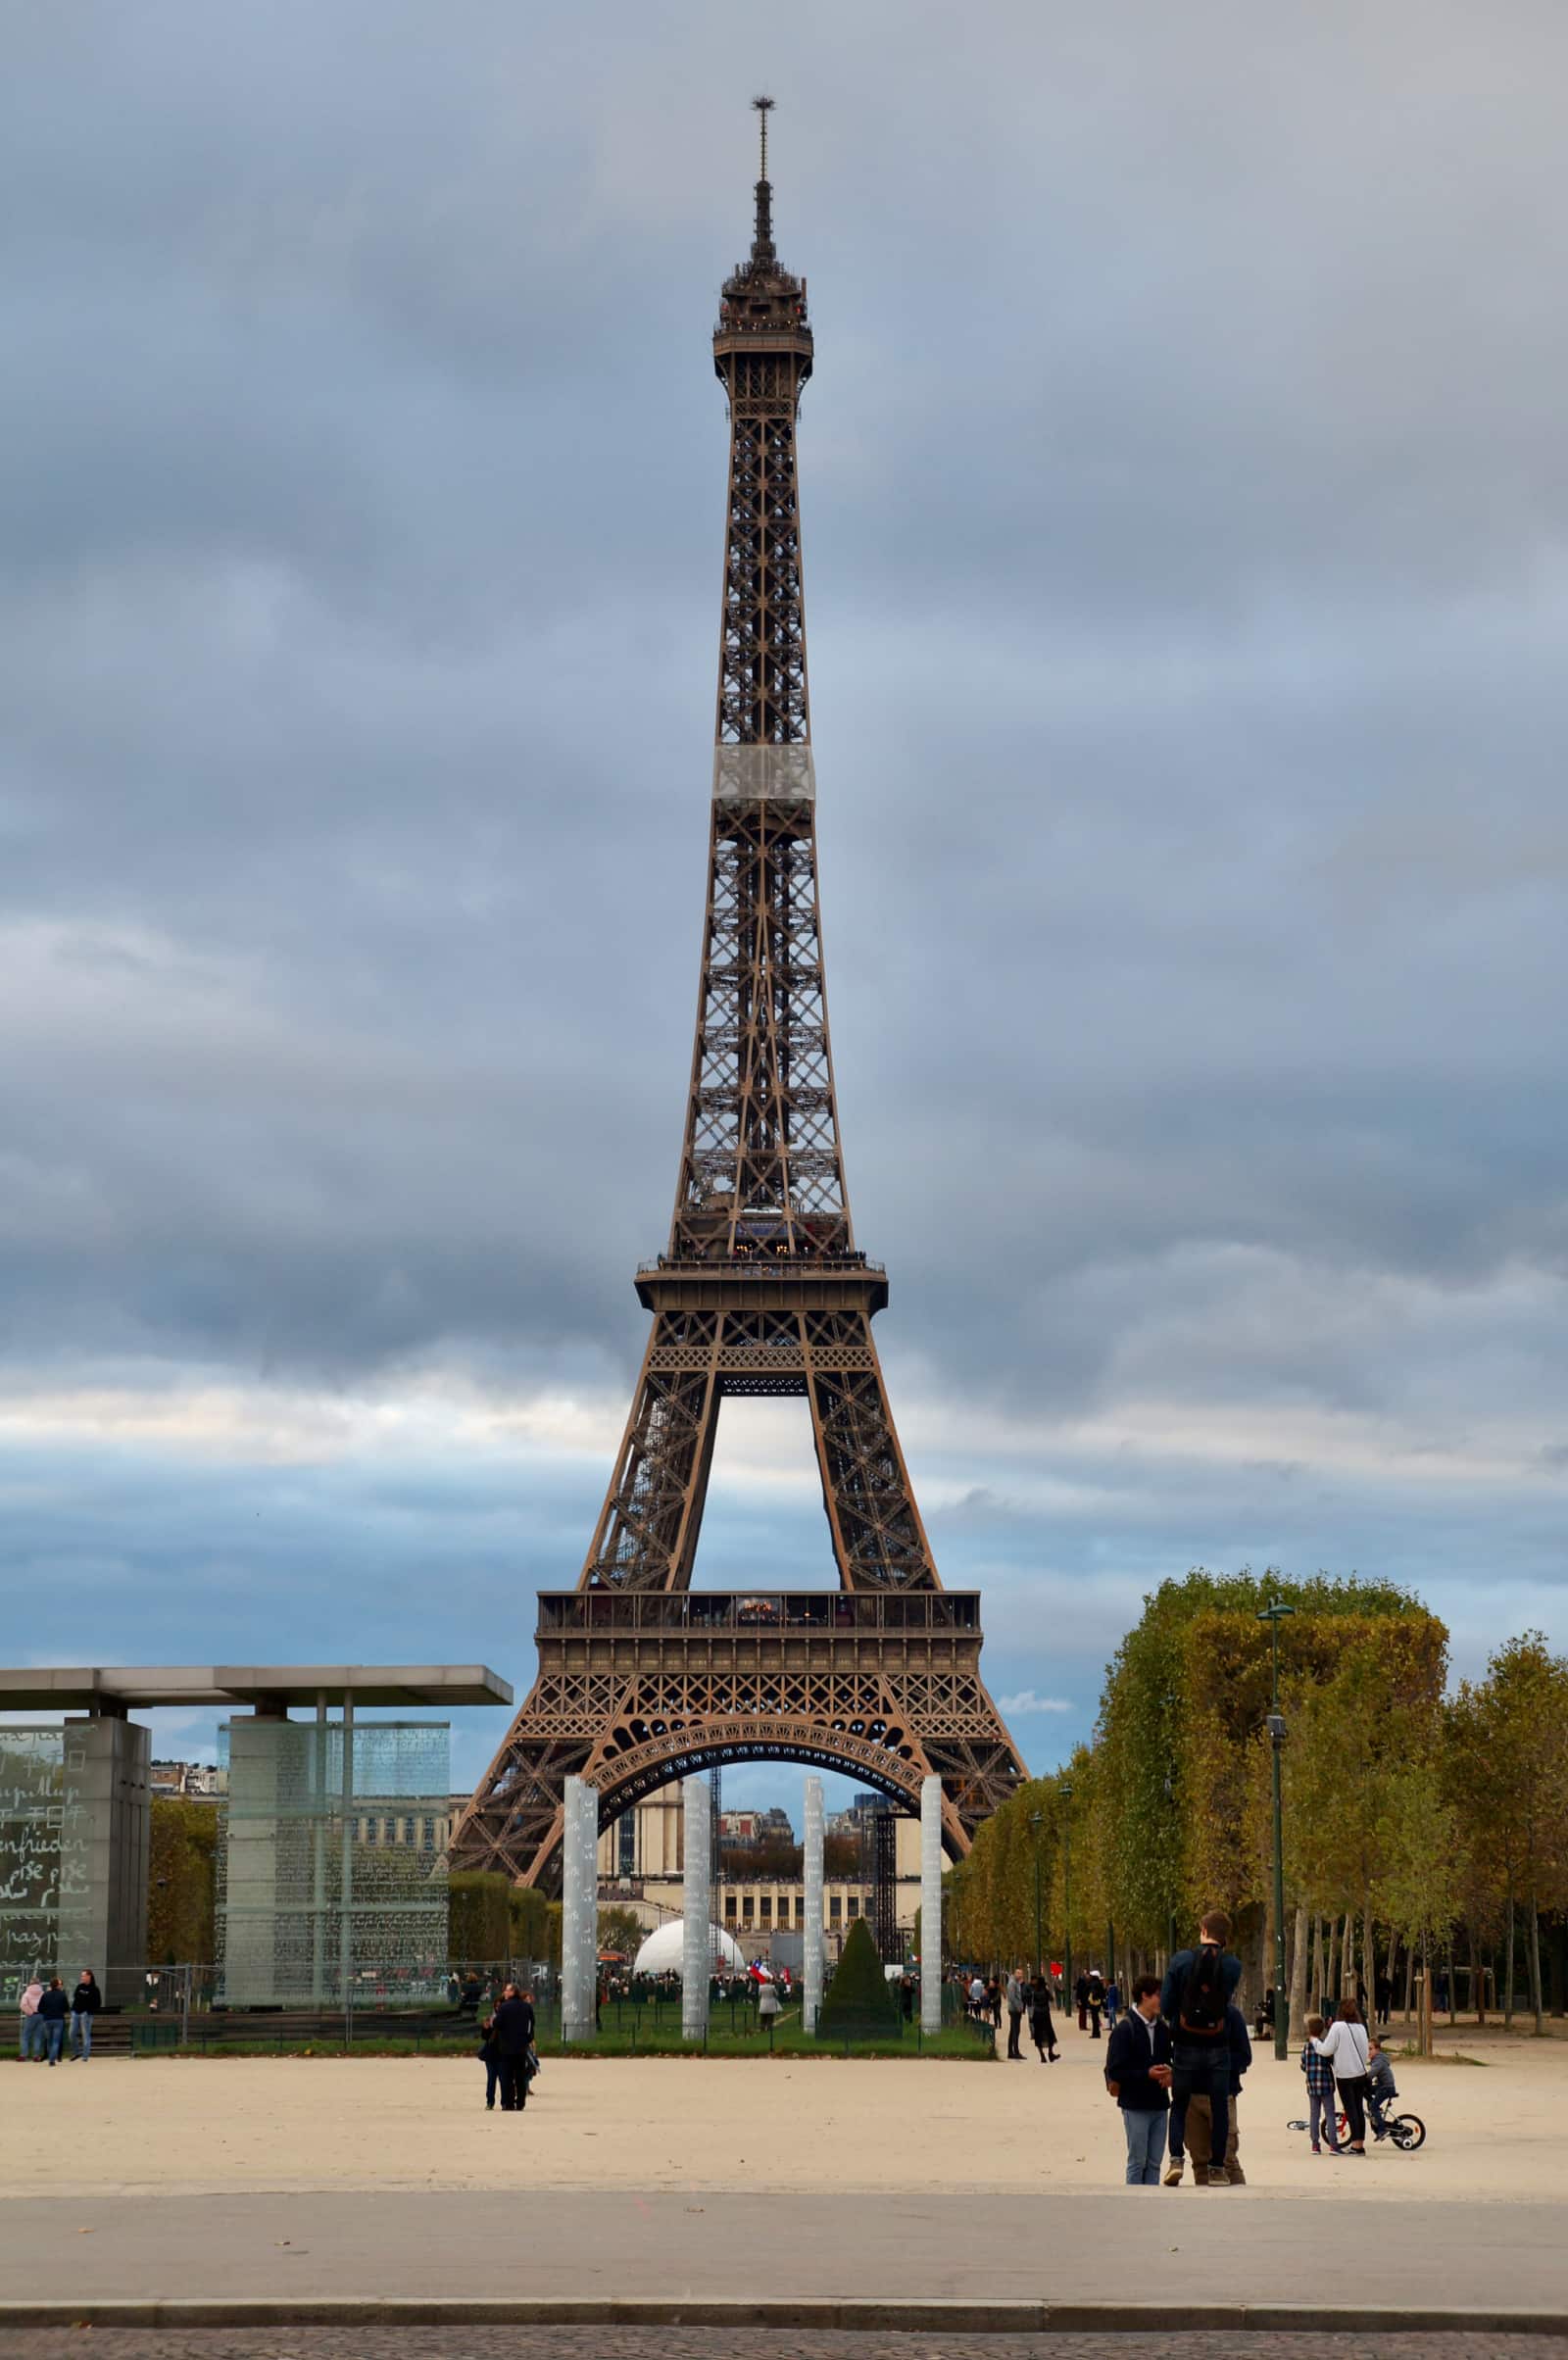 The Best Places to See the Eiffel Tower